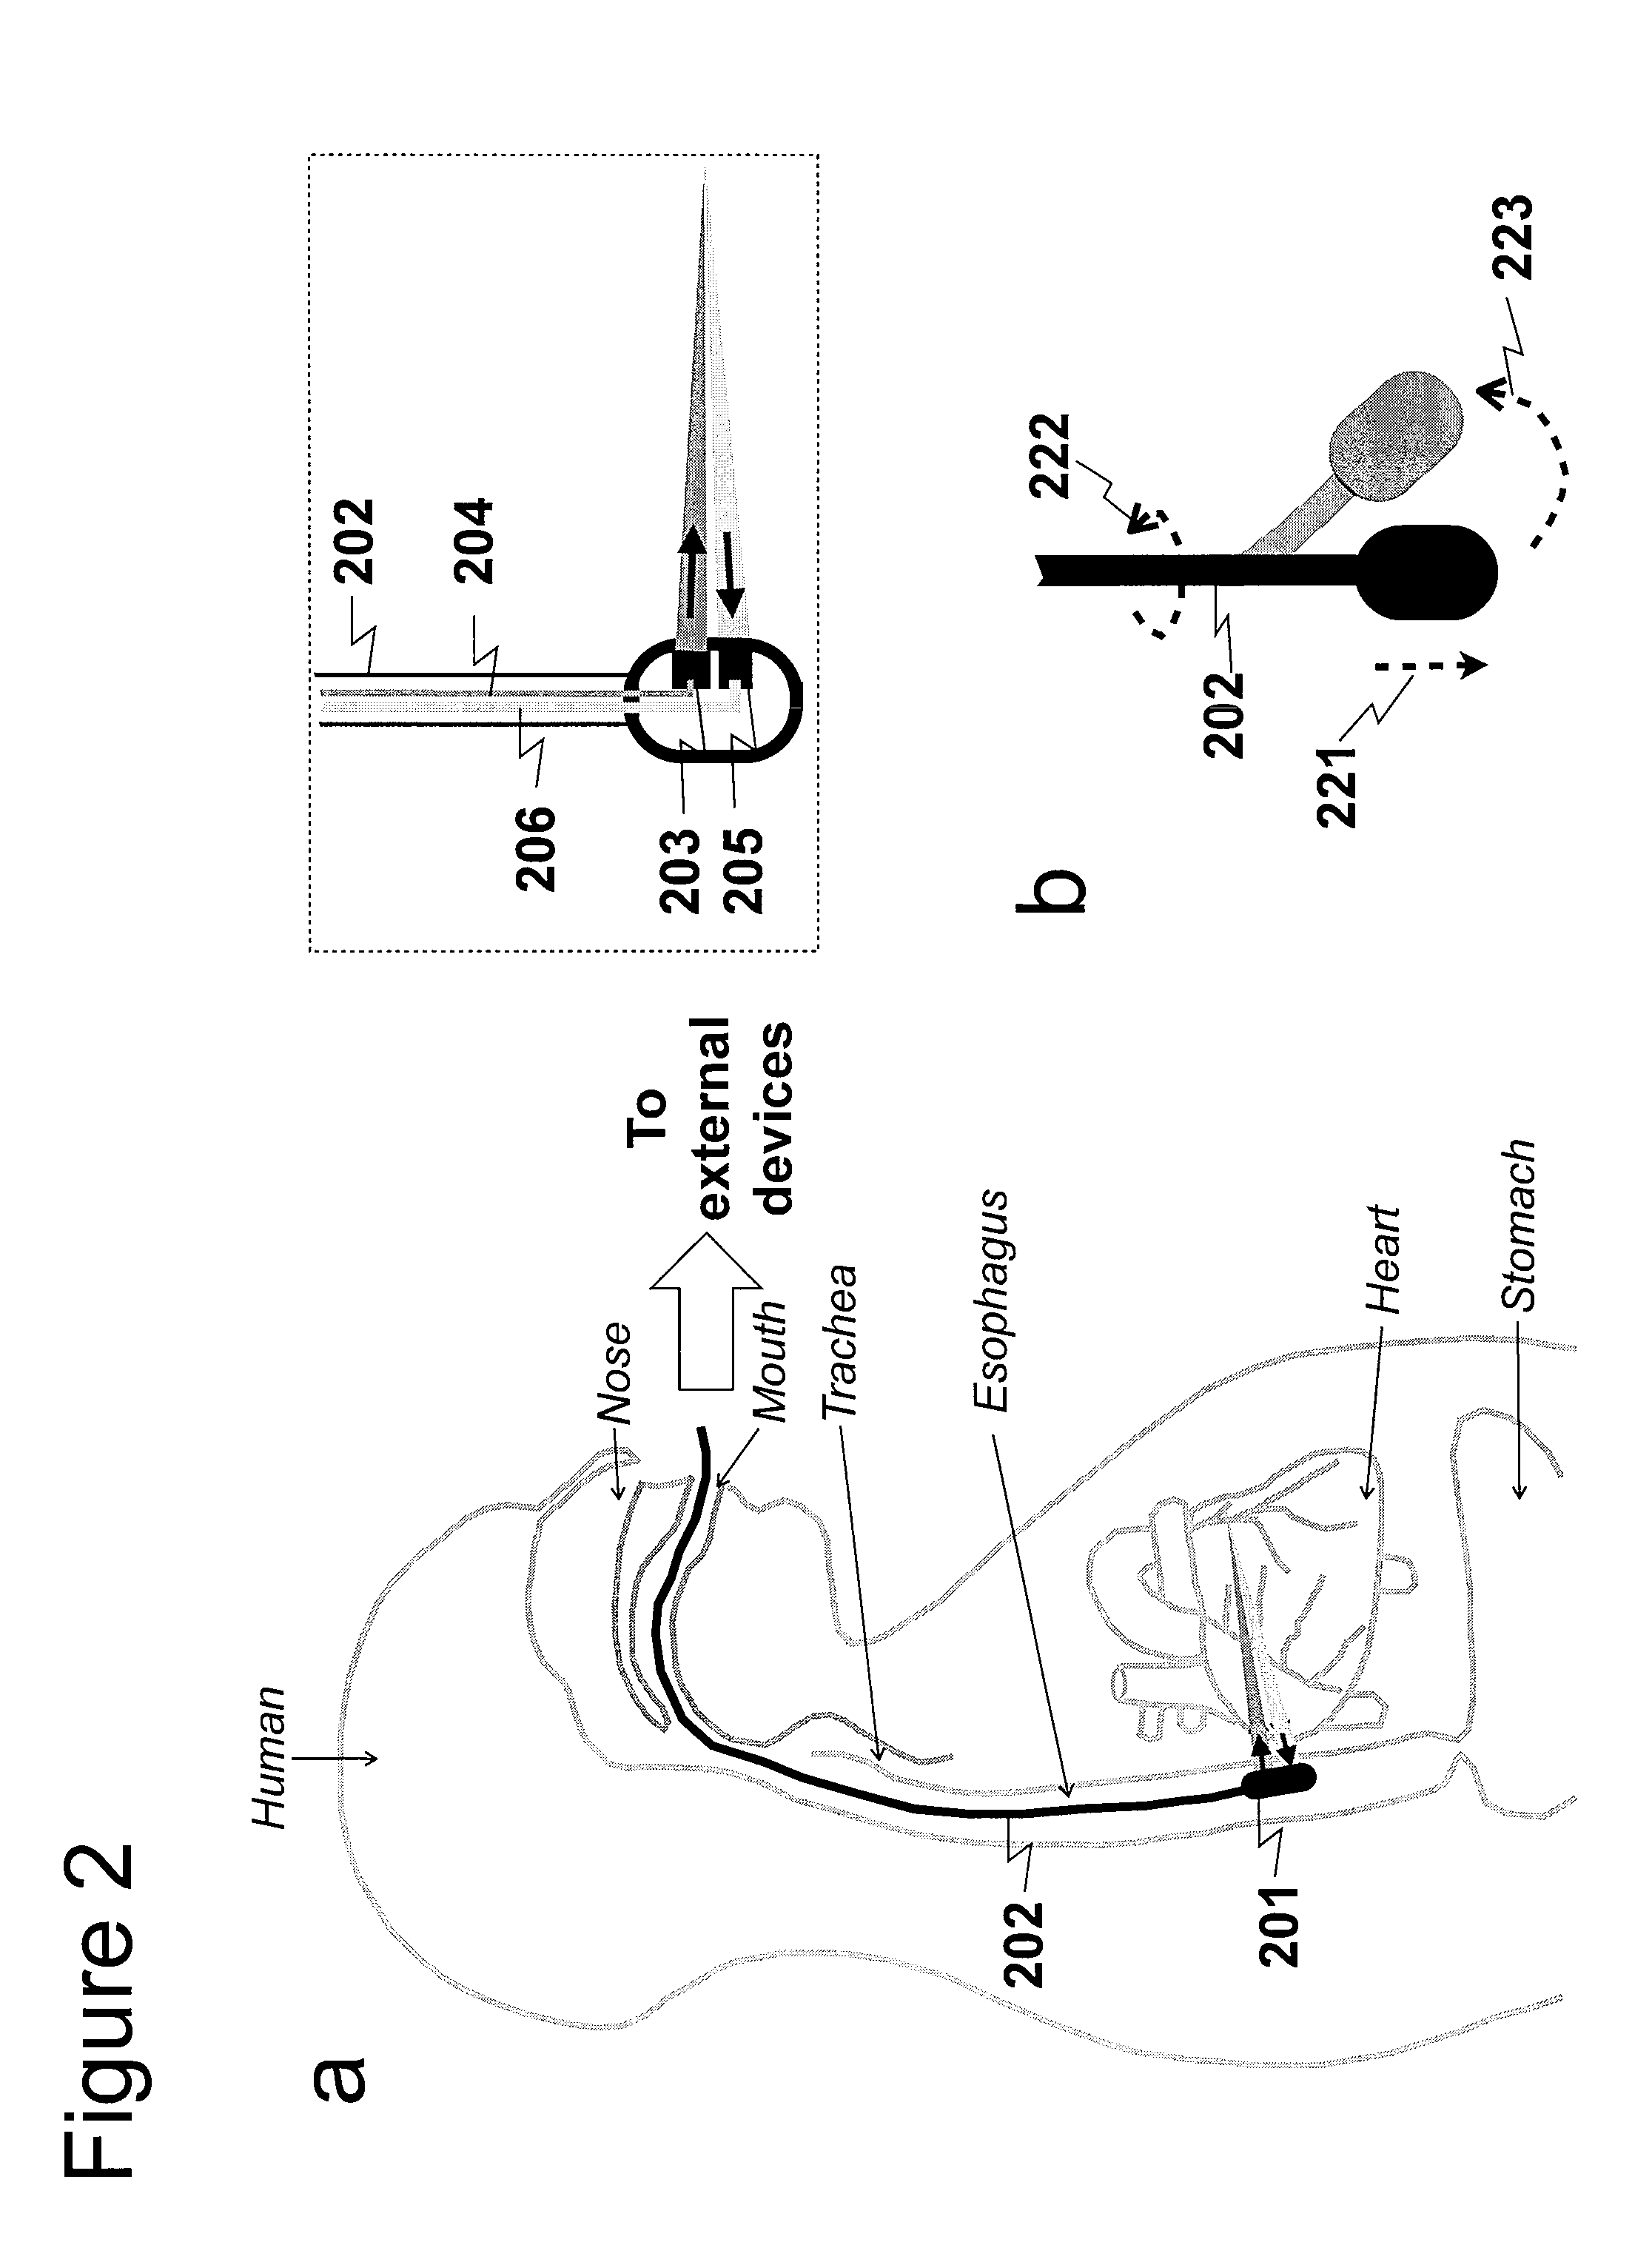 Apparatus, systems, methods and computer-accessible medium for analyzing information regarding cardiovascular diseases and functions